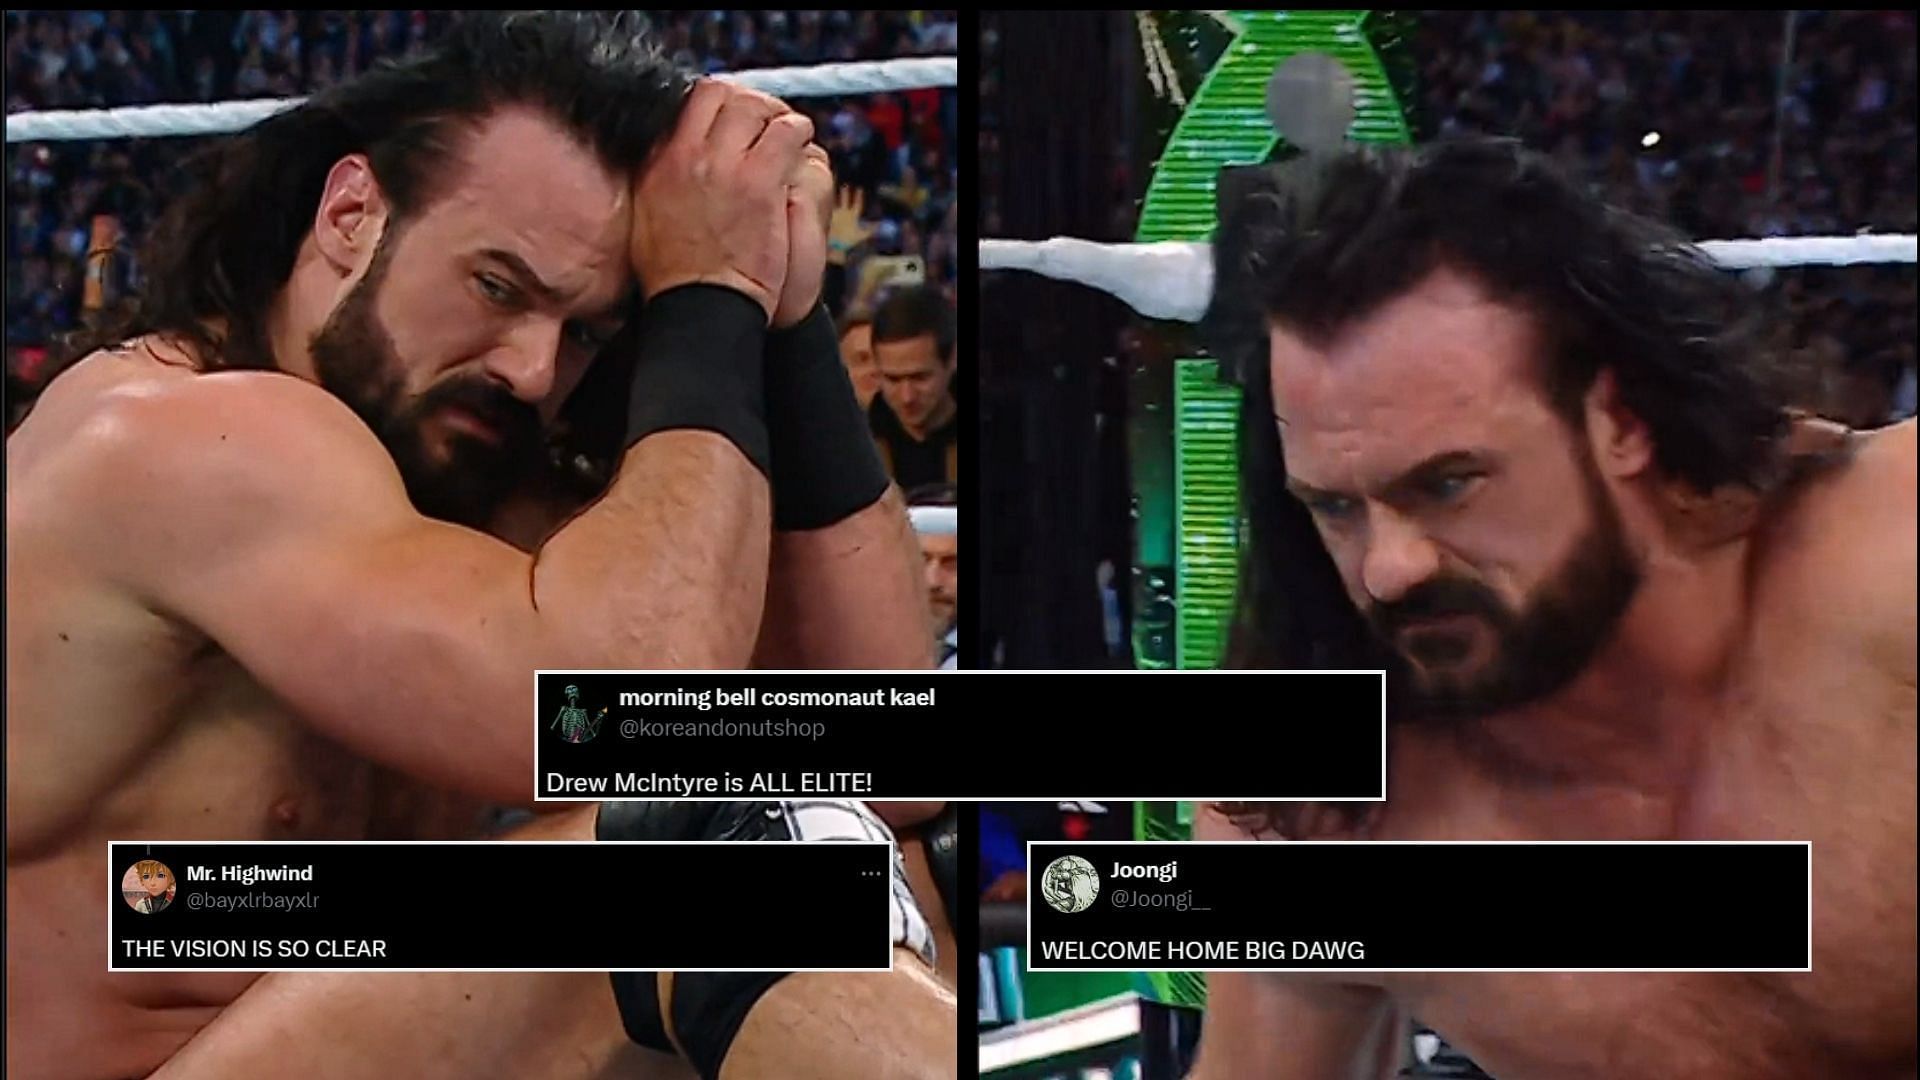 Drew McIntyre was unsuccessful in holding on to the World Heavyweight Championship [Photos courtesy of WWE